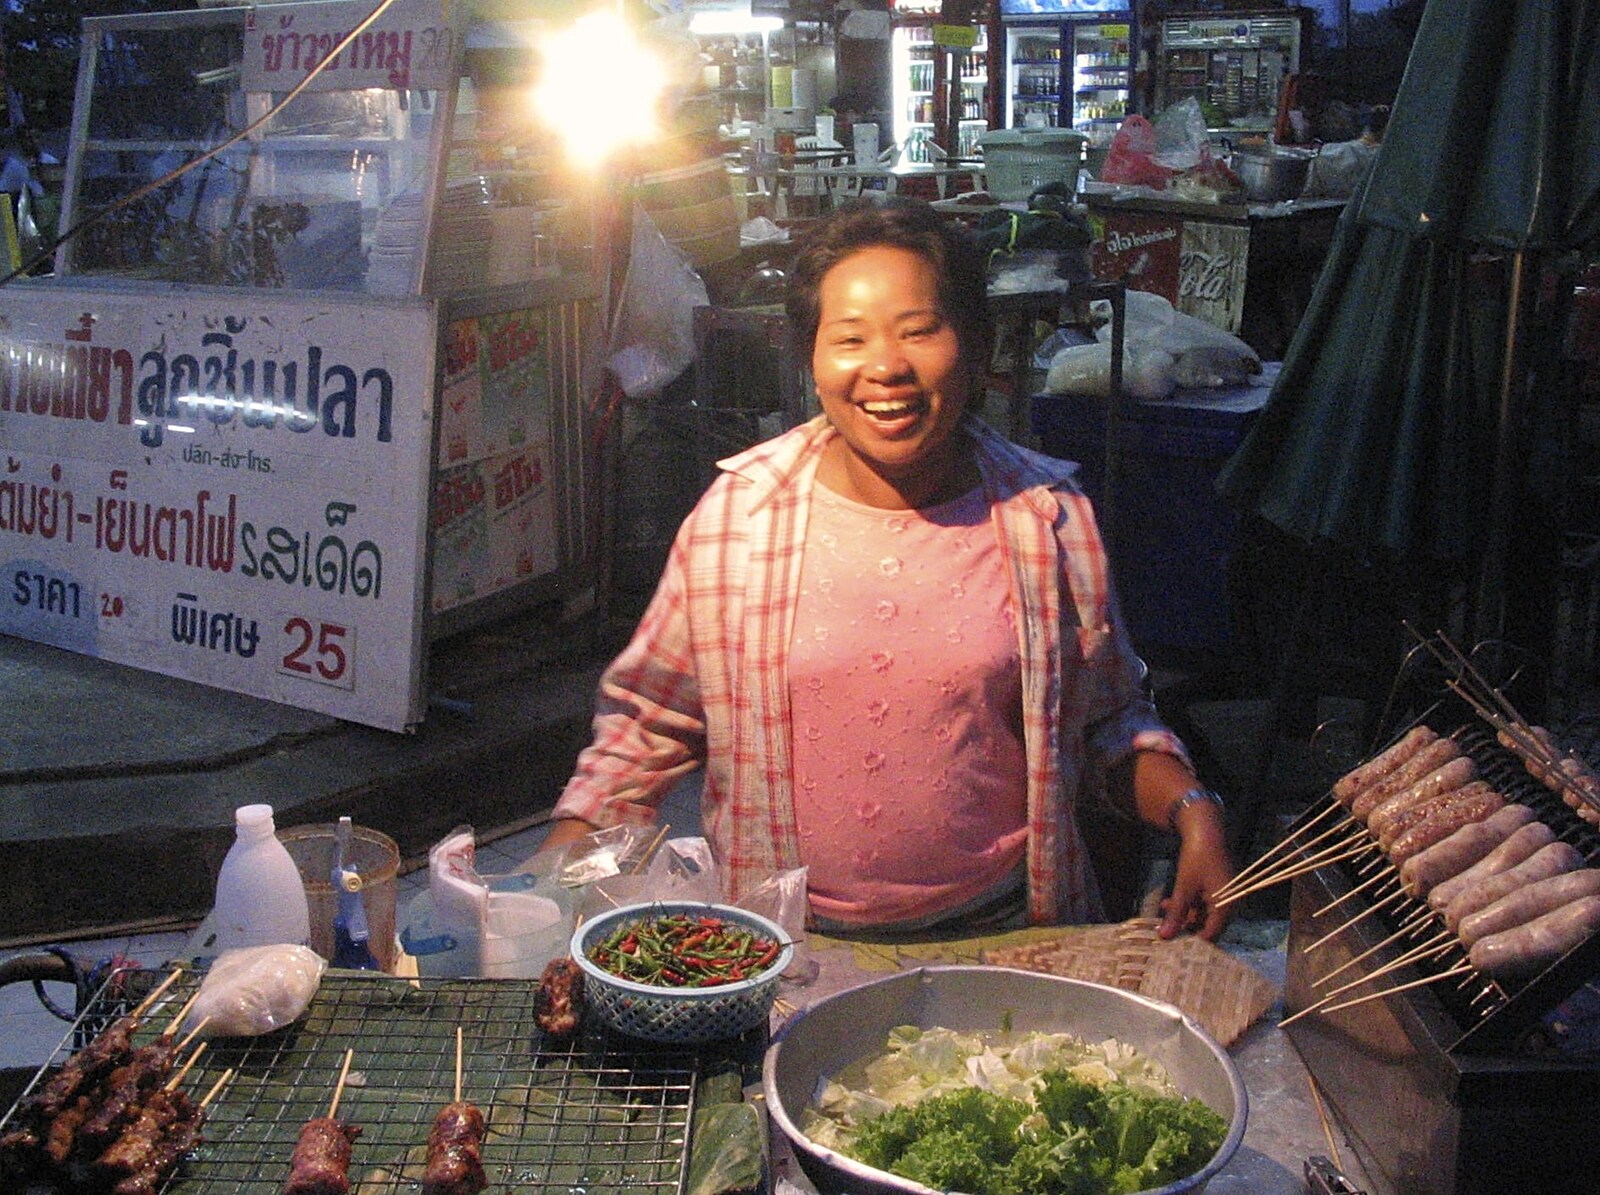 A cheerful woman sells meat on a stick from A Working Trip to Bangkok, Thailand - 2nd October 2004